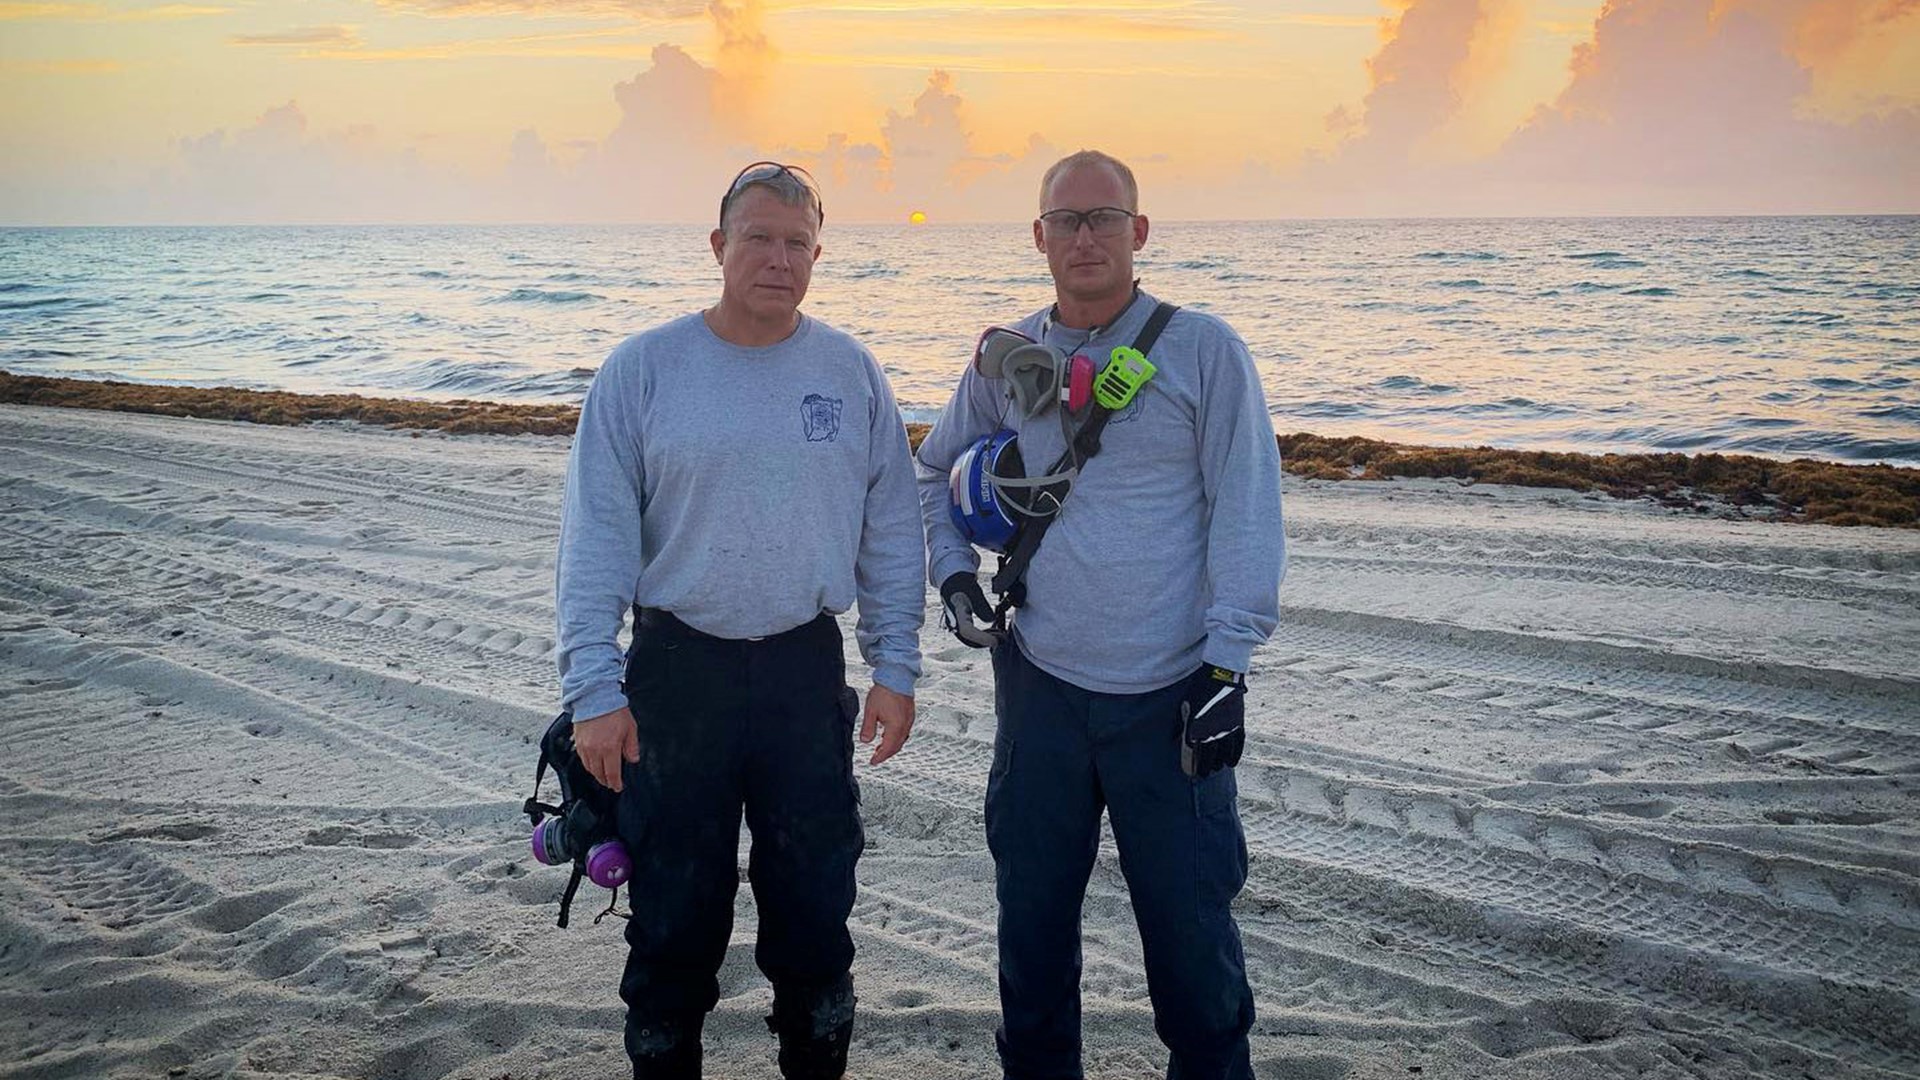 Brownsburg Fire Territory crew members are continuing to assist with recovery efforts in Florida, nearly 20 days after the condo building collapsed in Surfside.